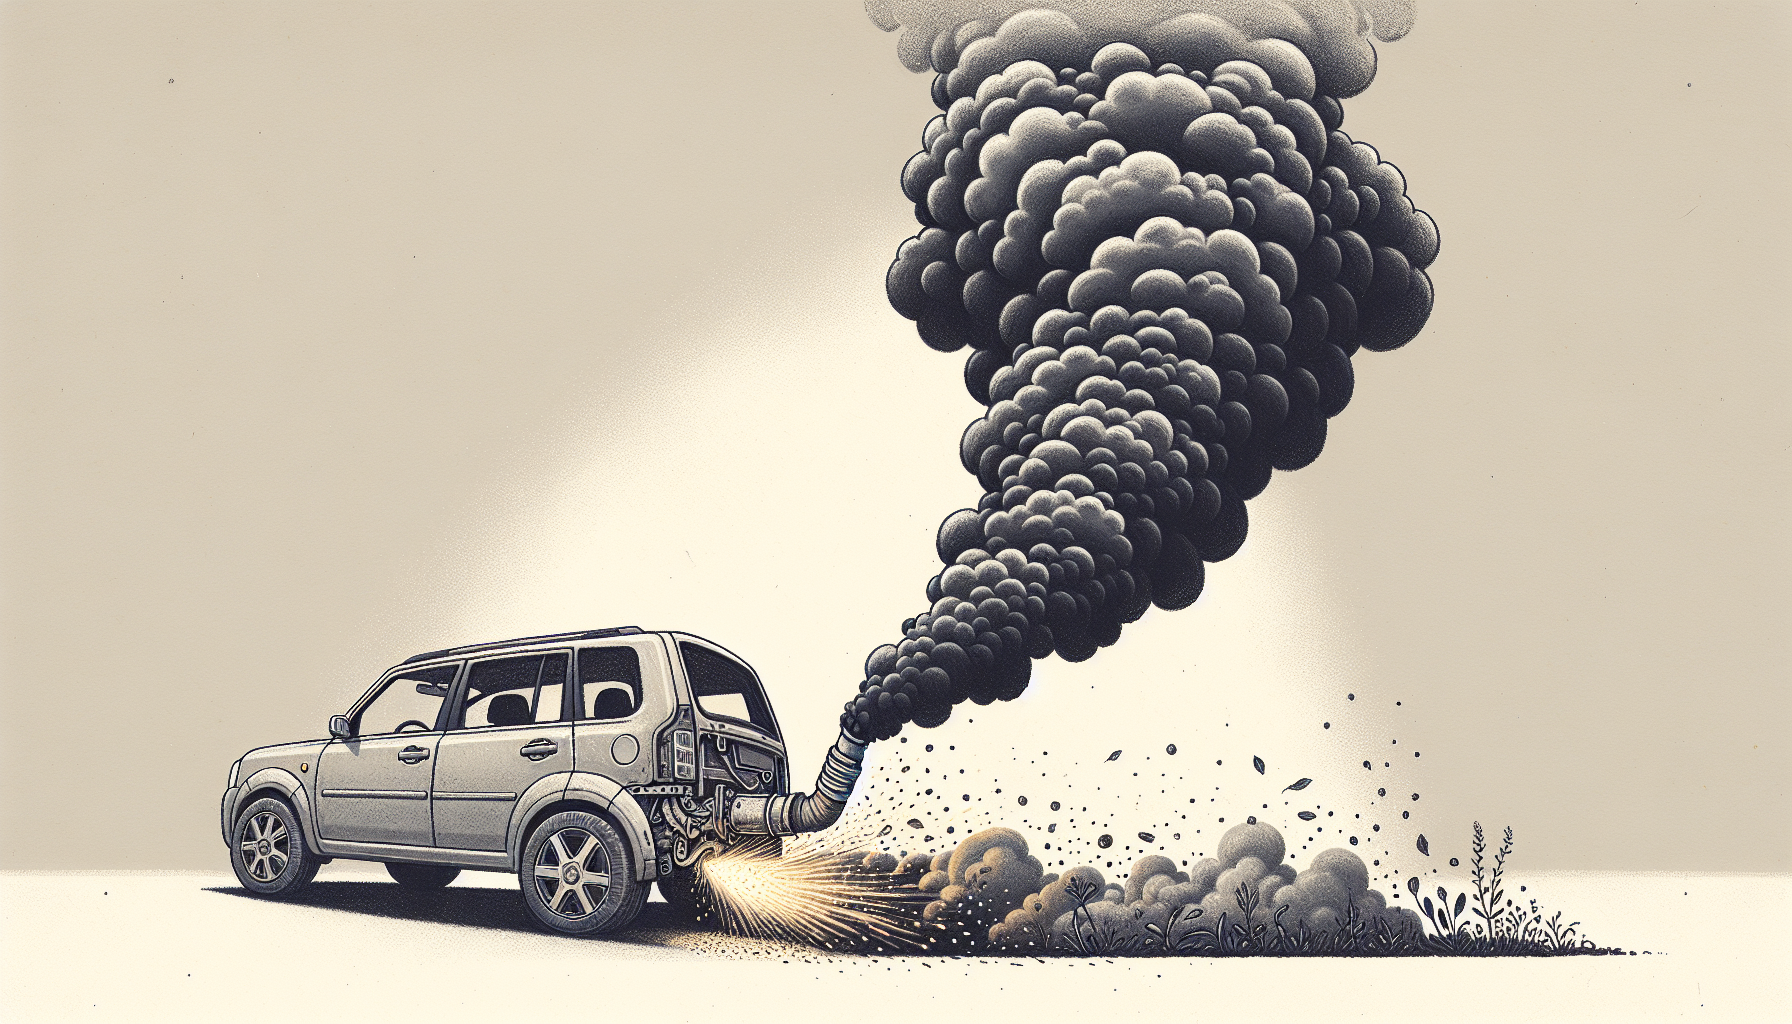 Illustration of a vehicle emitting excessive exhaust fumes